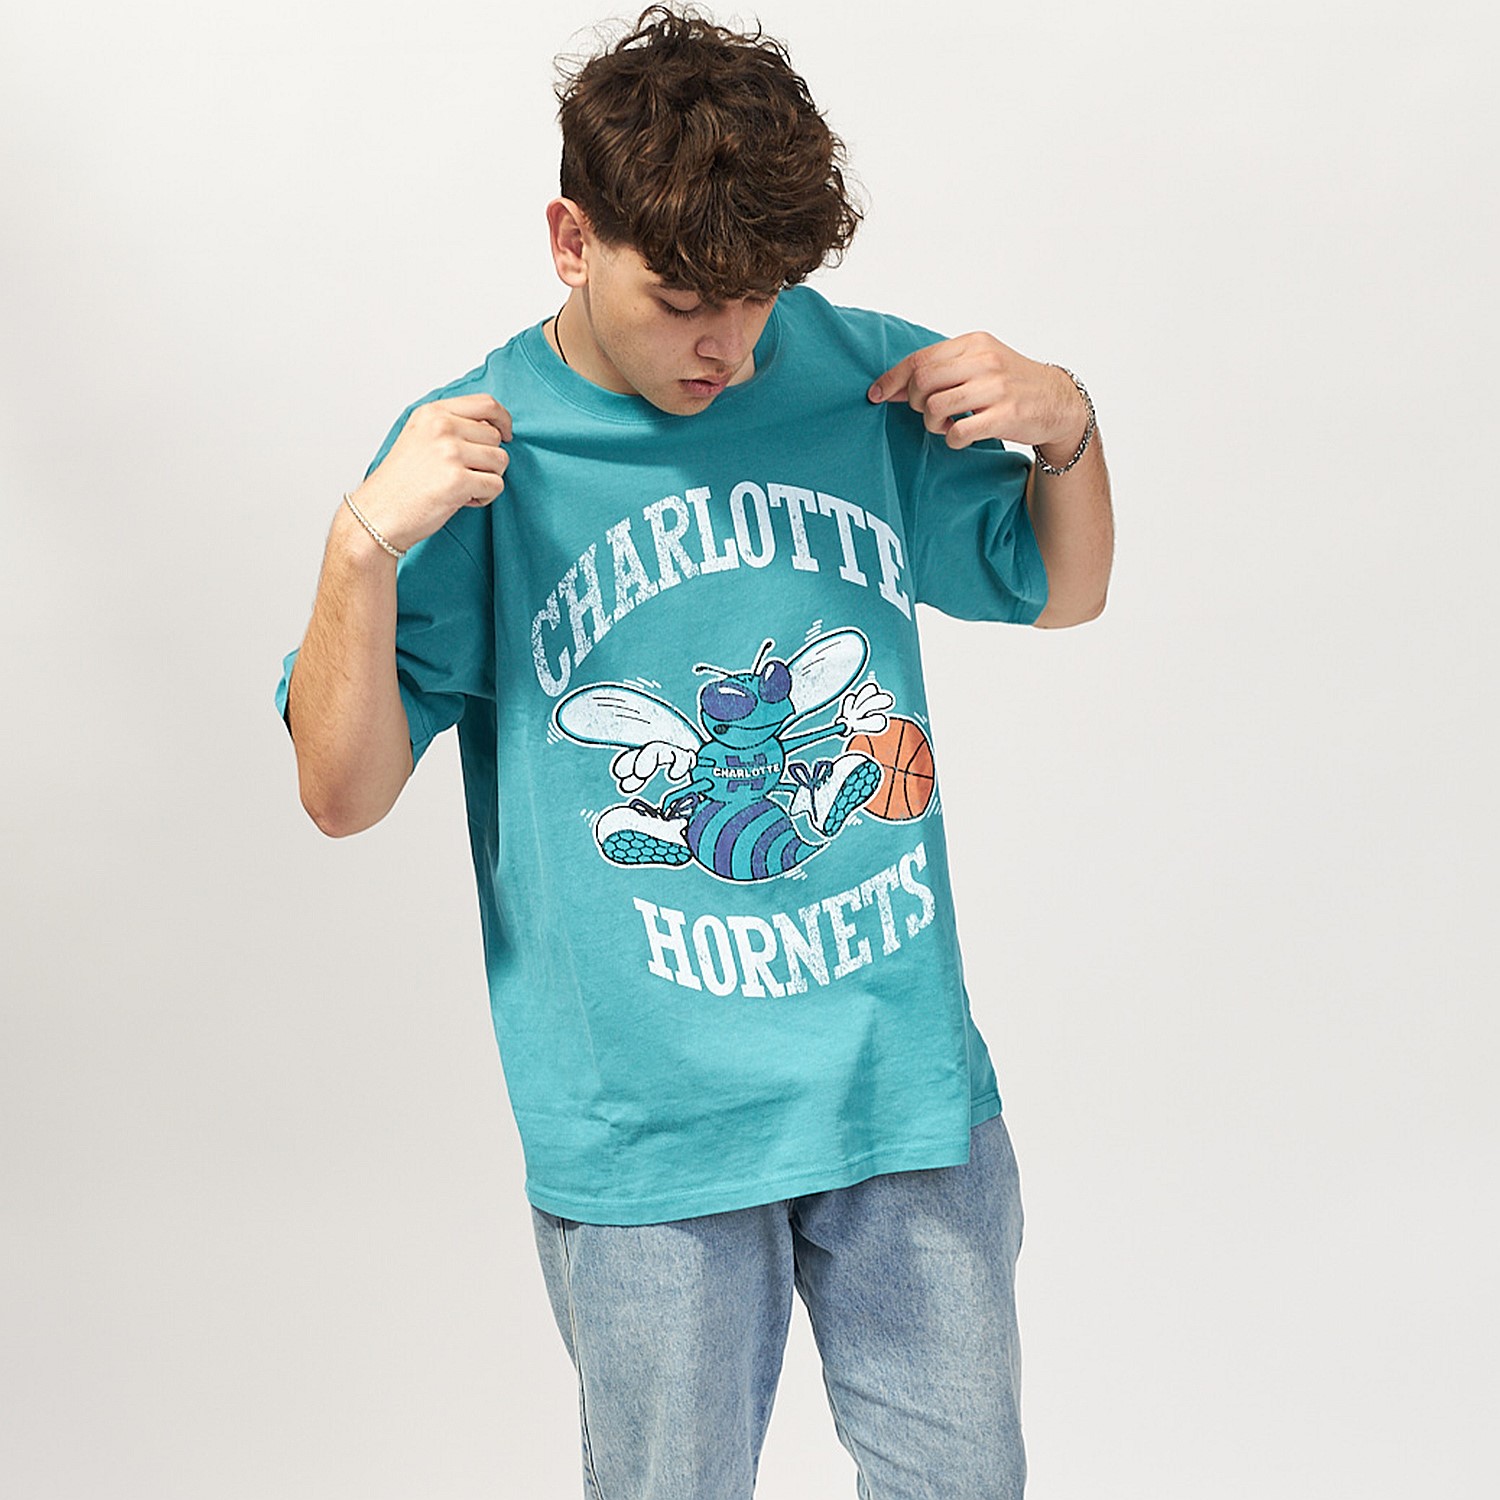 charlotte hornets graphic tee